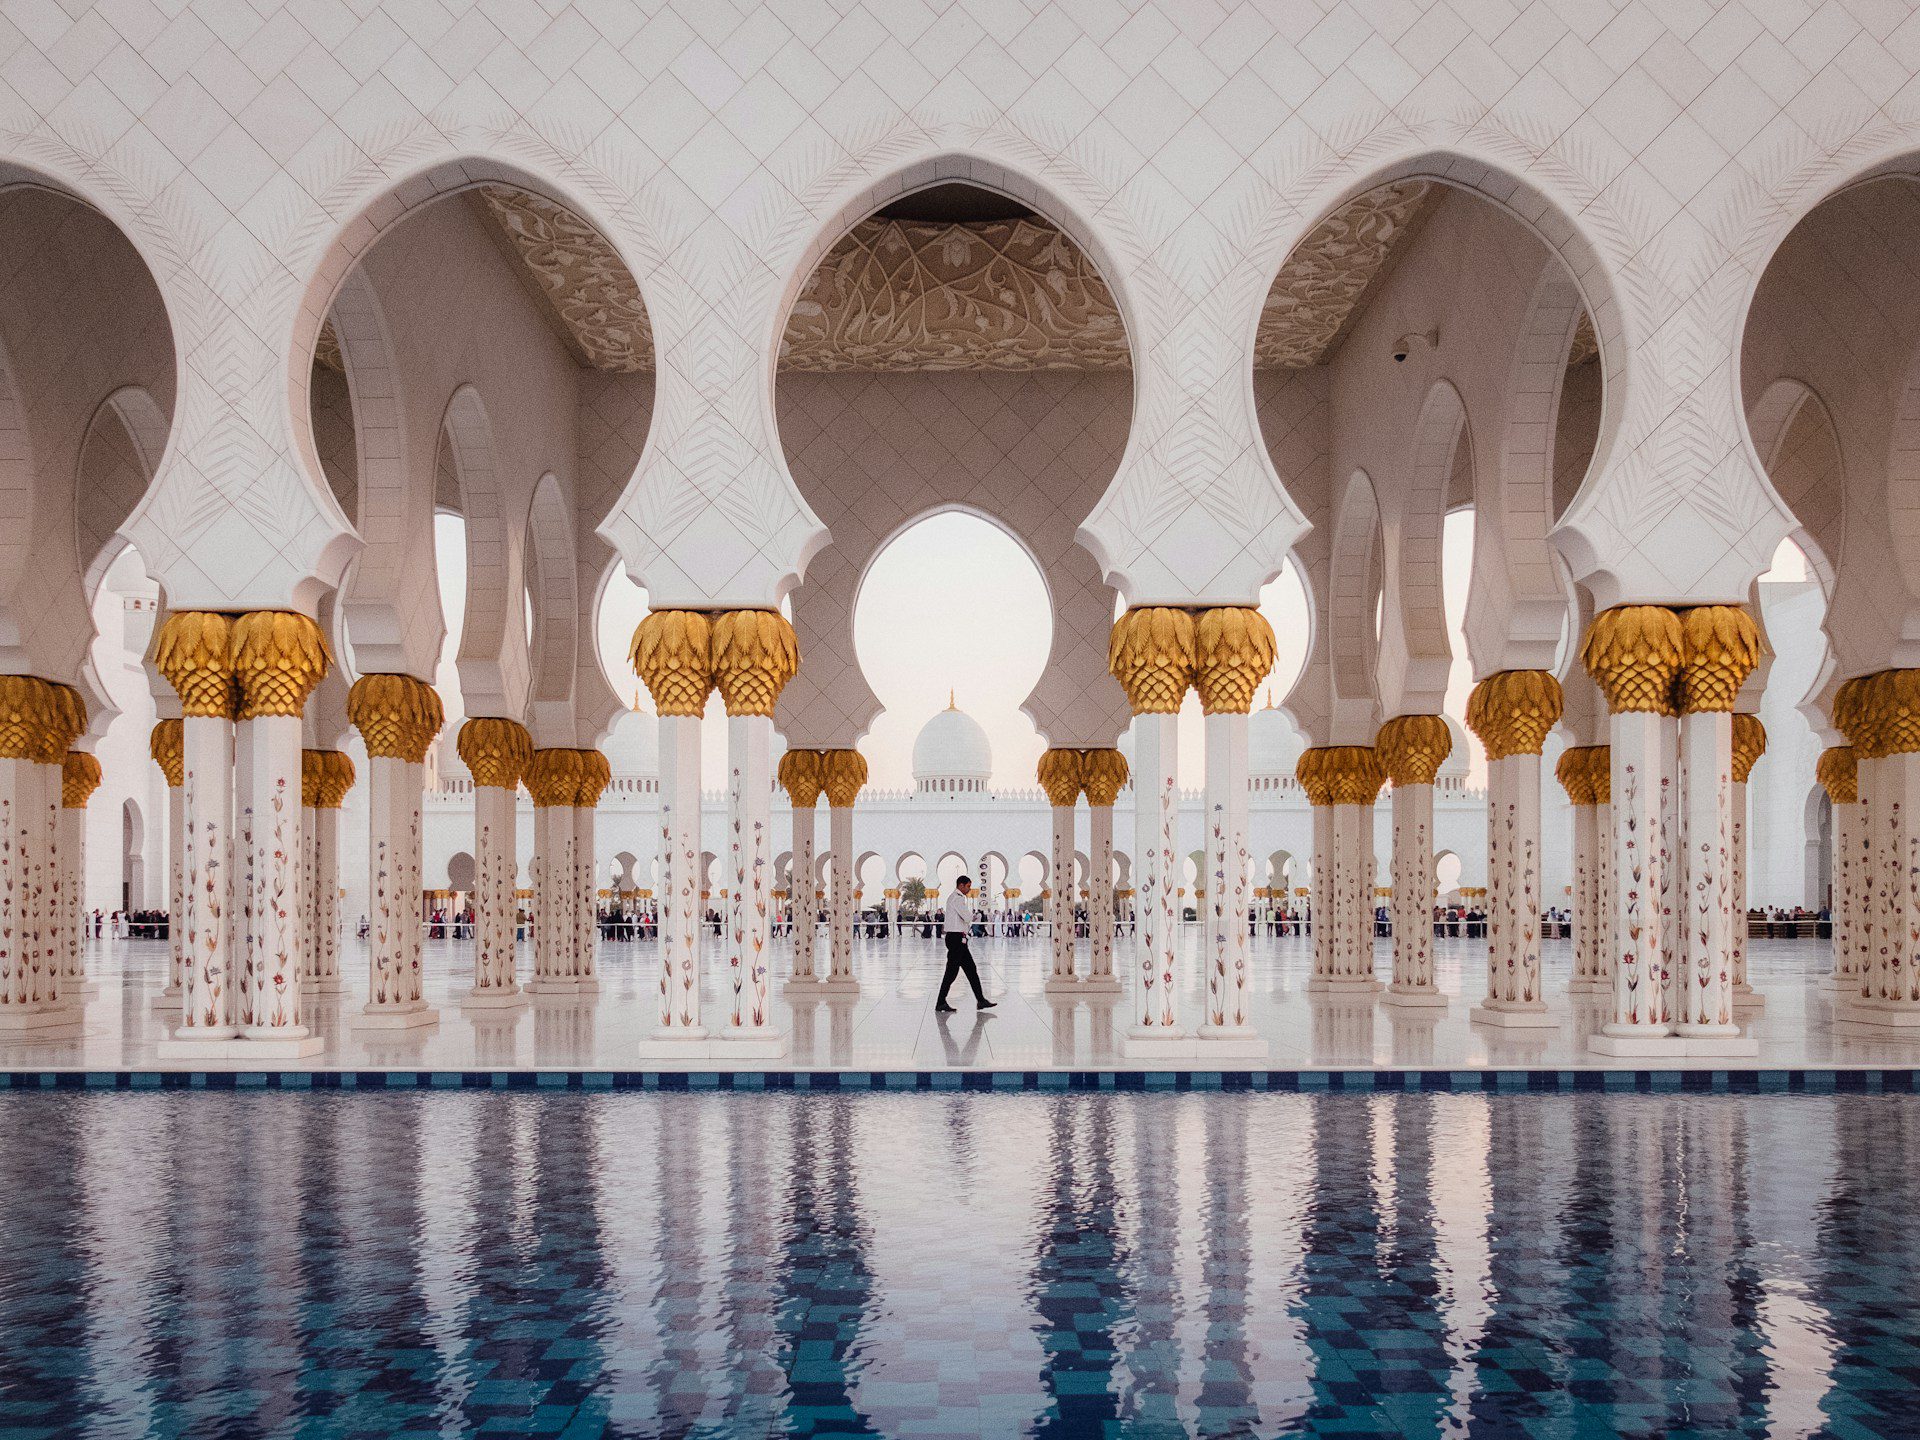 Close up of the Grand Mosque, showing beautiful white and gold columns, with a large body of water in front.